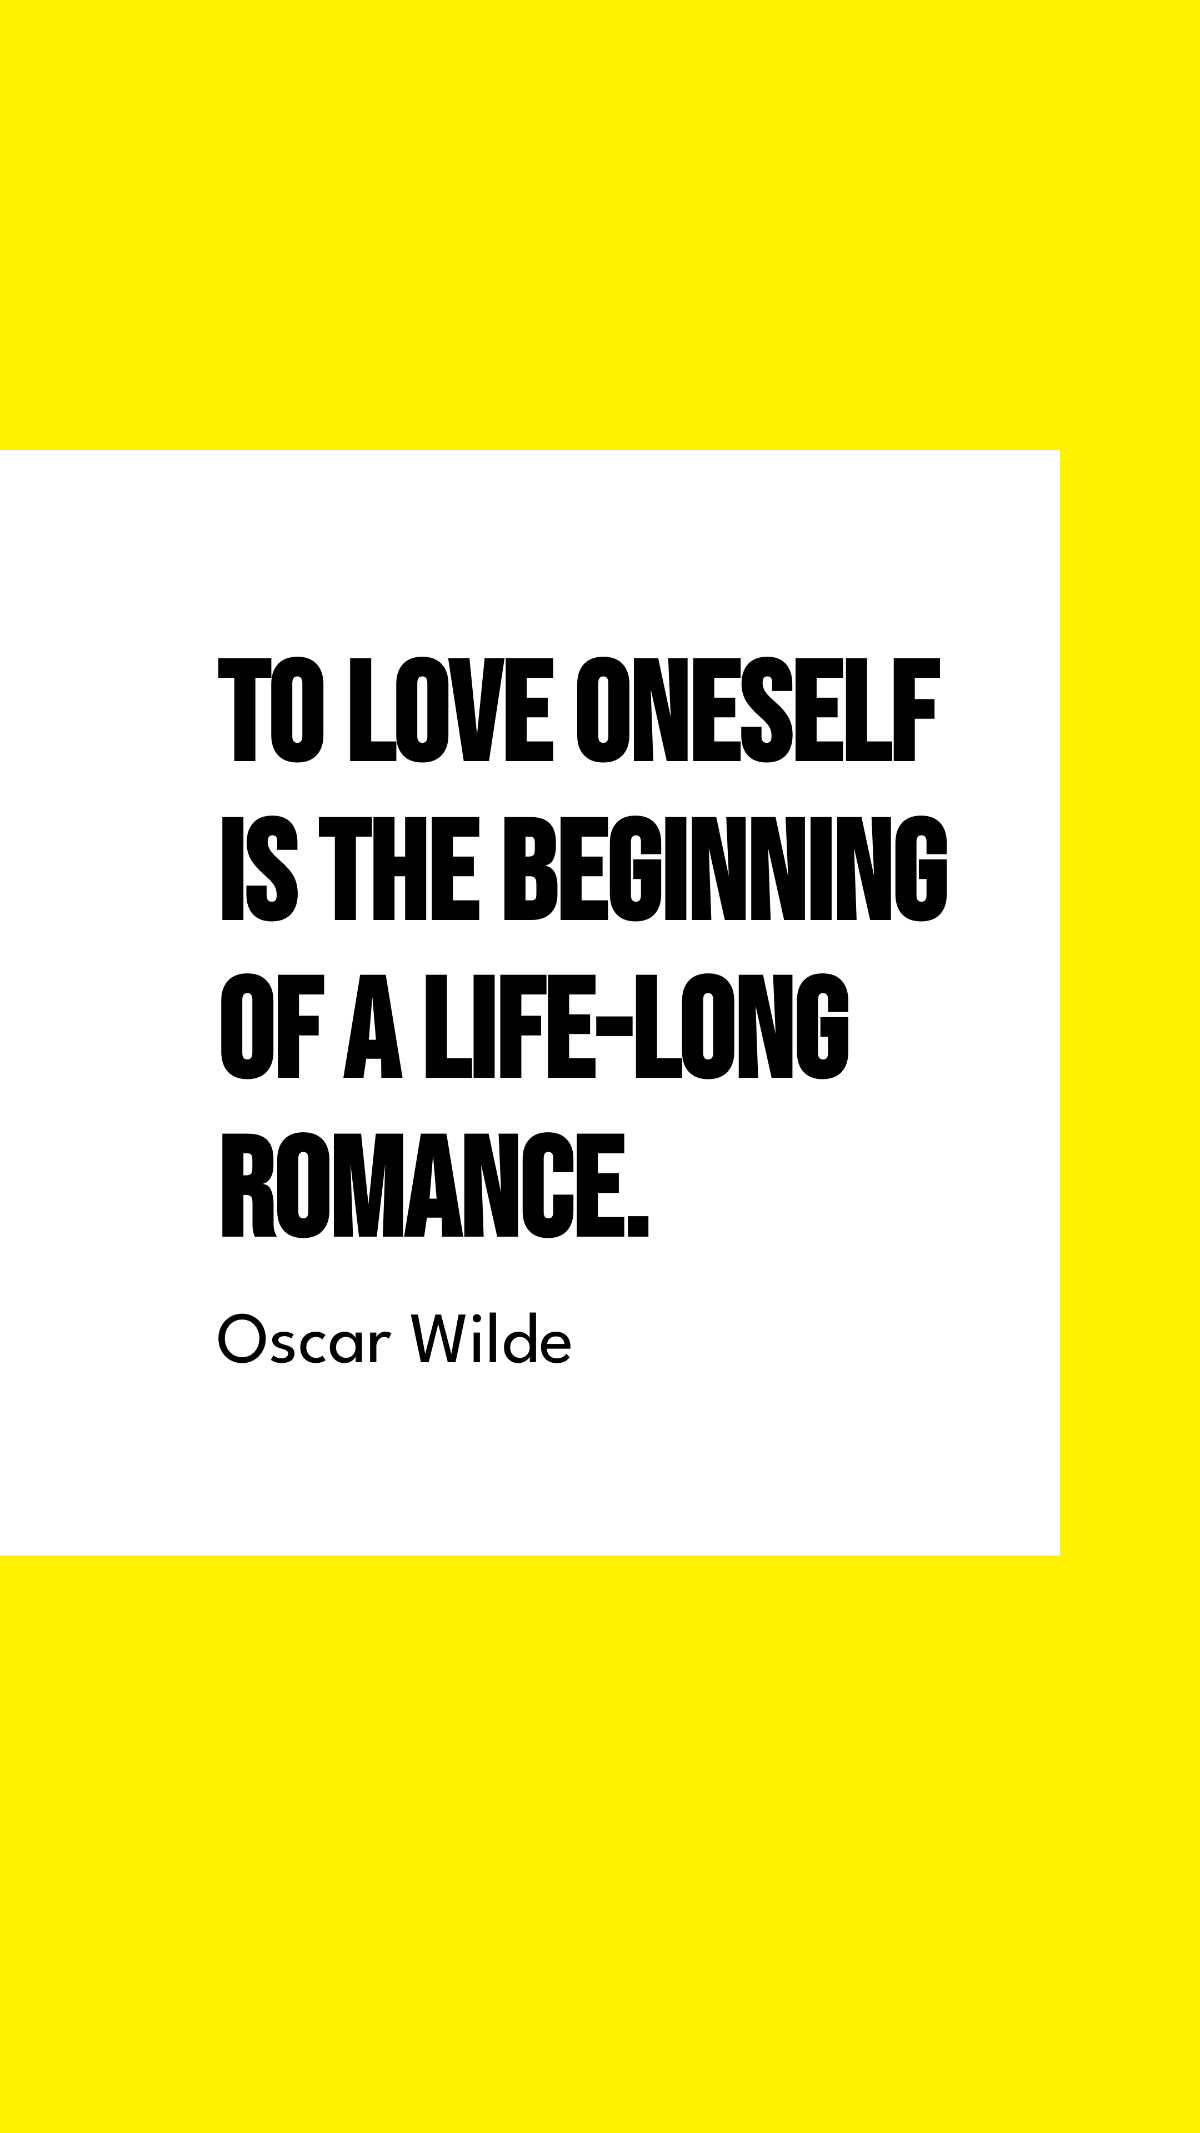 Oscar Wilde - To love oneself is the beginning of a life-long romance.